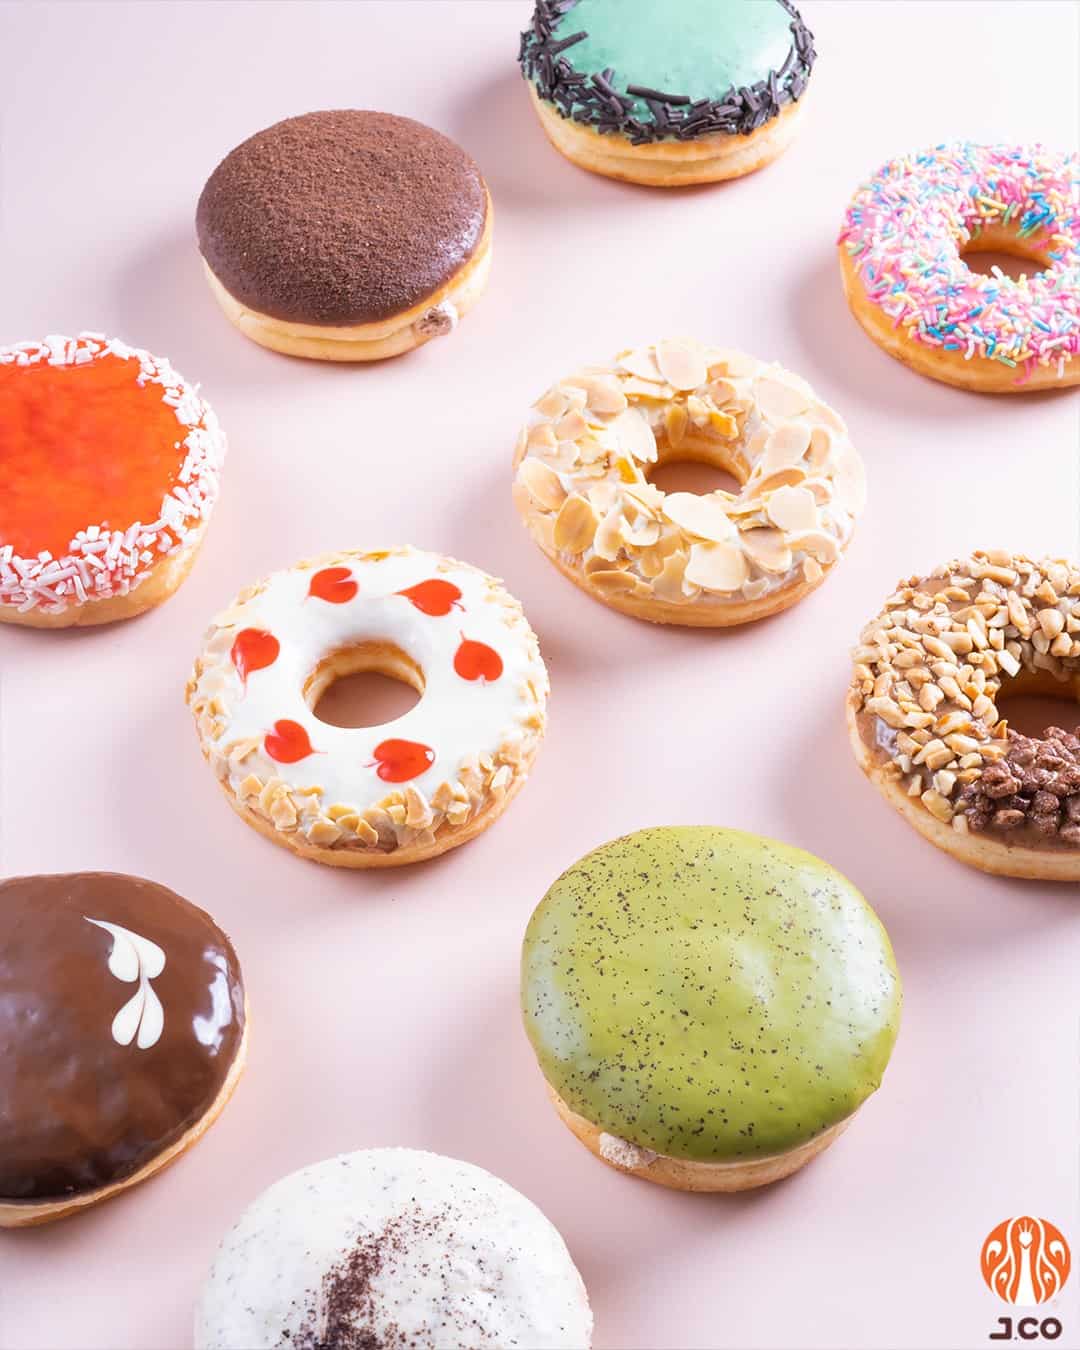 Different Flavors of Tasty Donuts From Jco Donuts And Coffee Menu